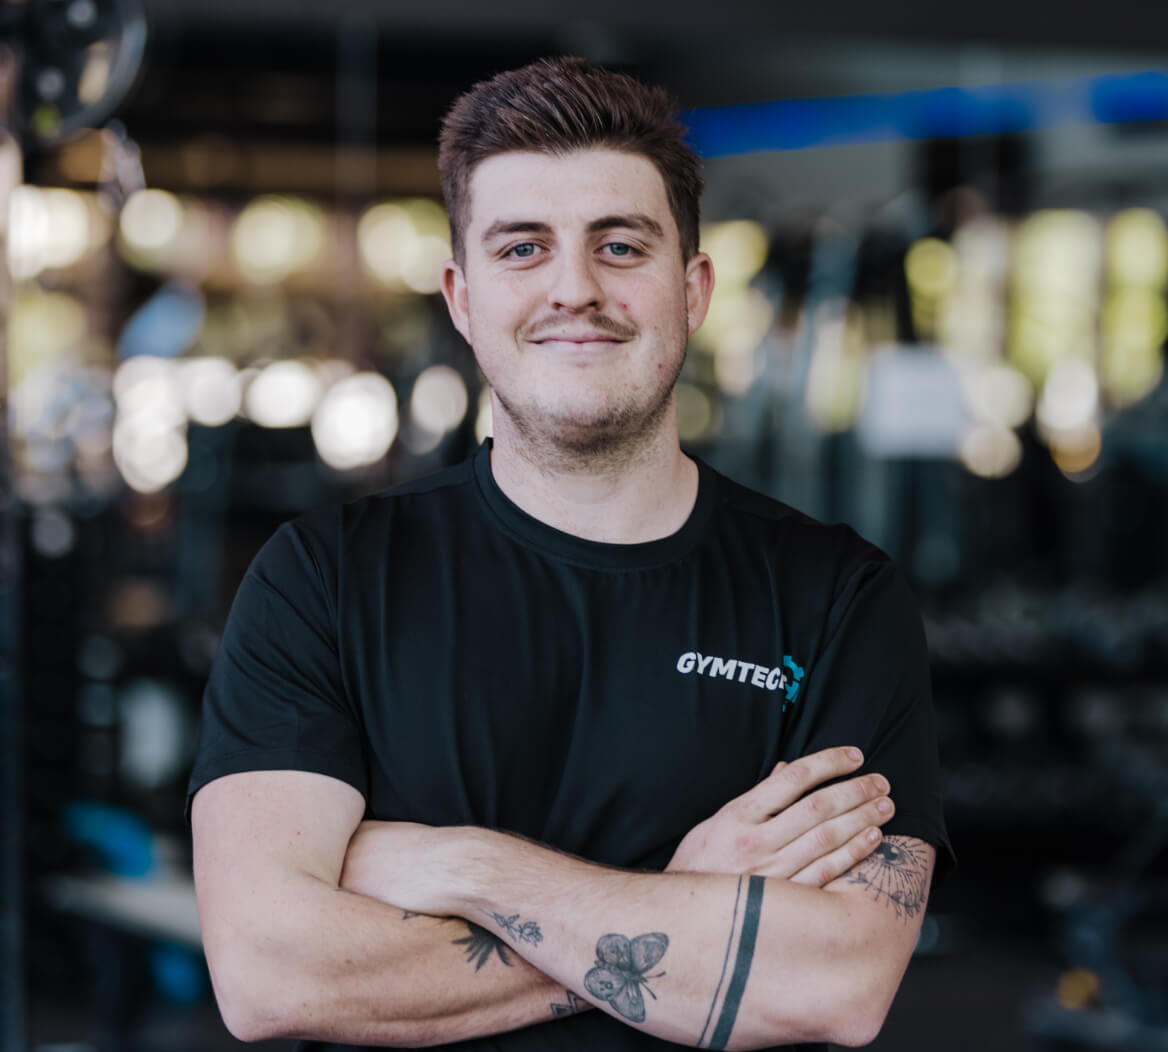 Jack from Gymtechs